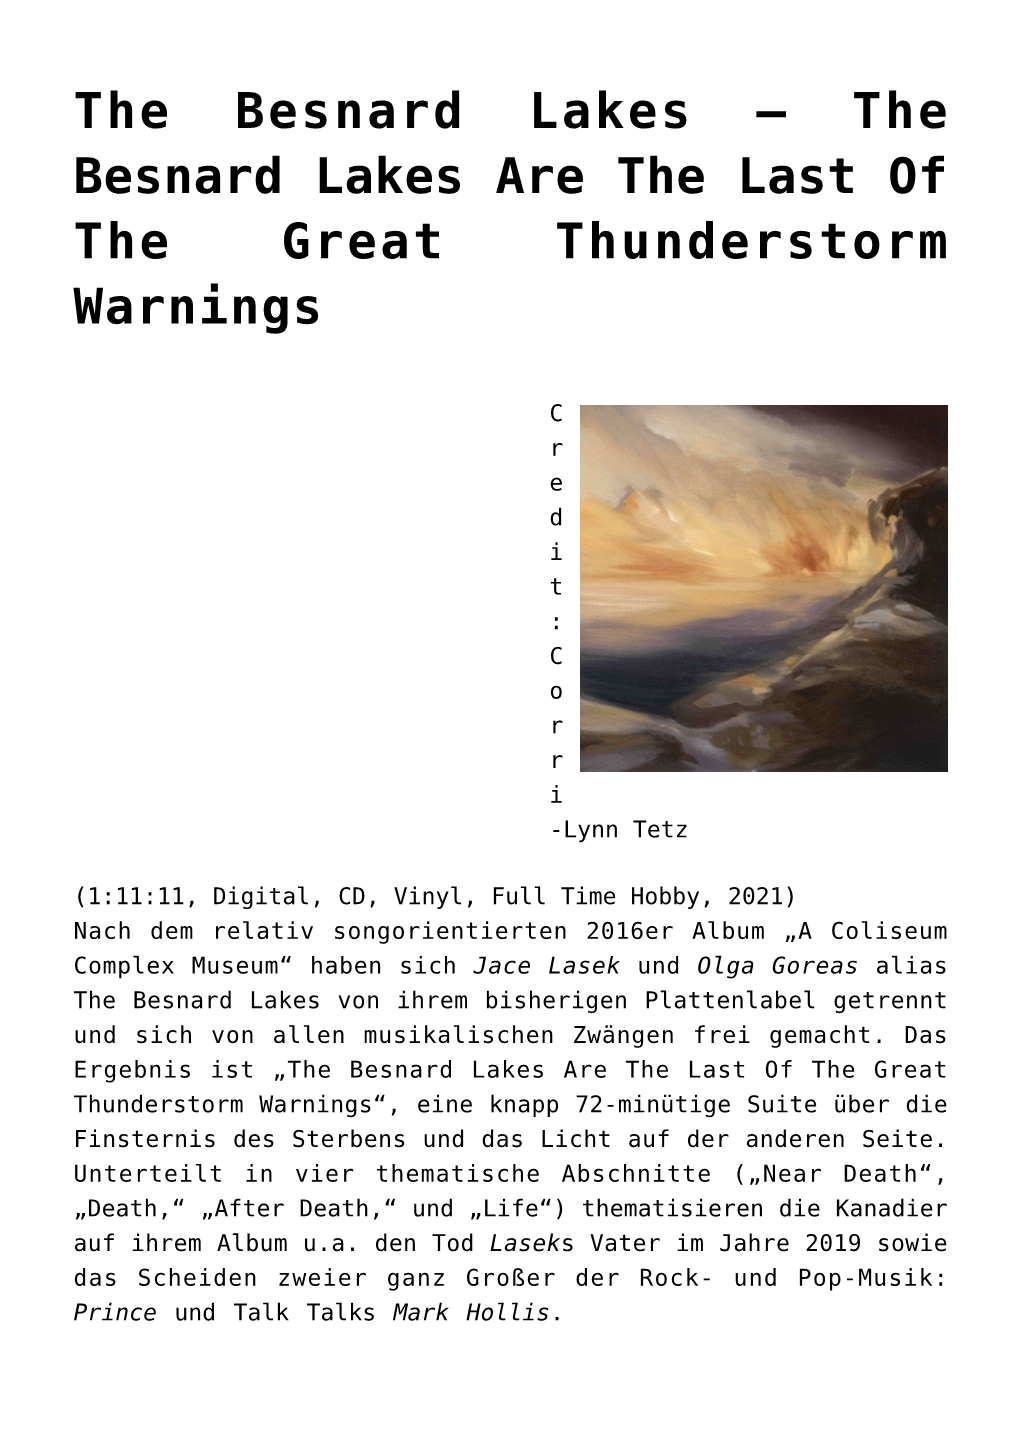 The Besnard Lakes Are the Last of the Great Thunderstorm Warnings